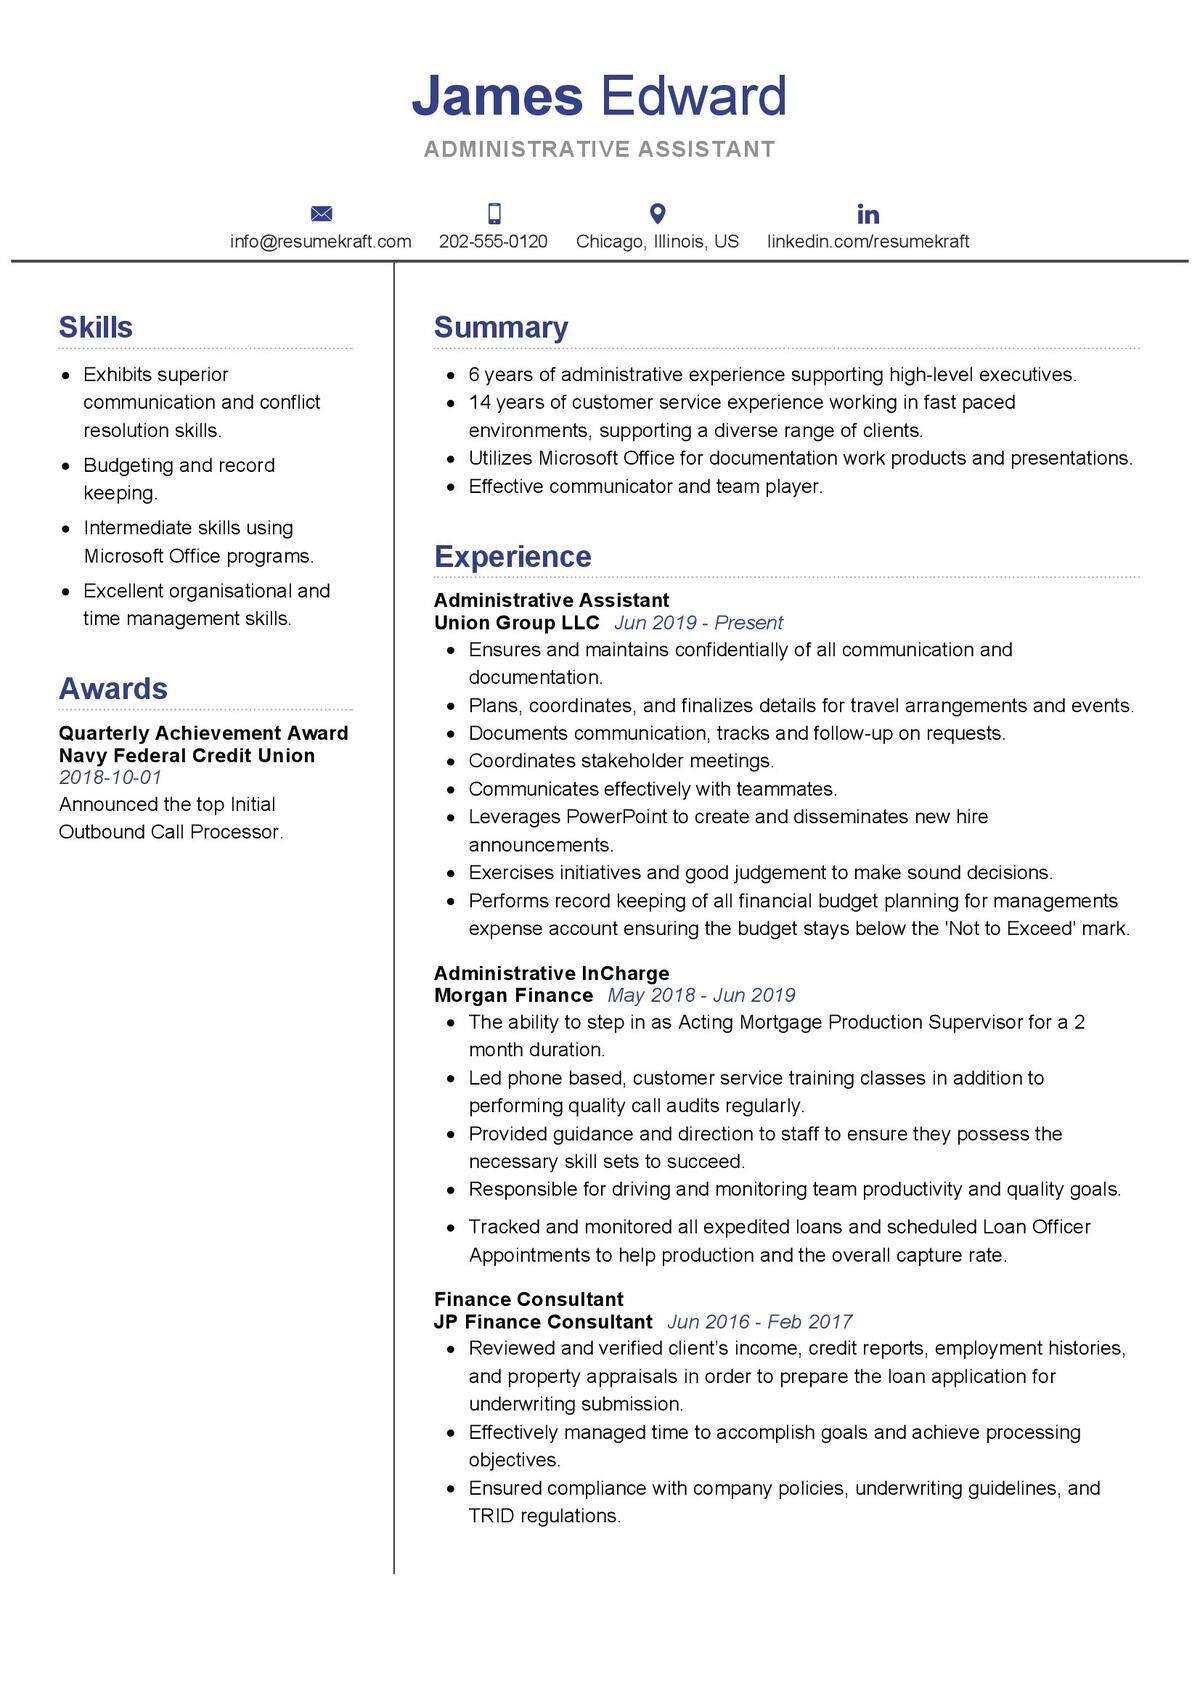 Skills Based Resume Template Administrative assistant Administrative assistant Resume Sample 2021 Writing Guide …